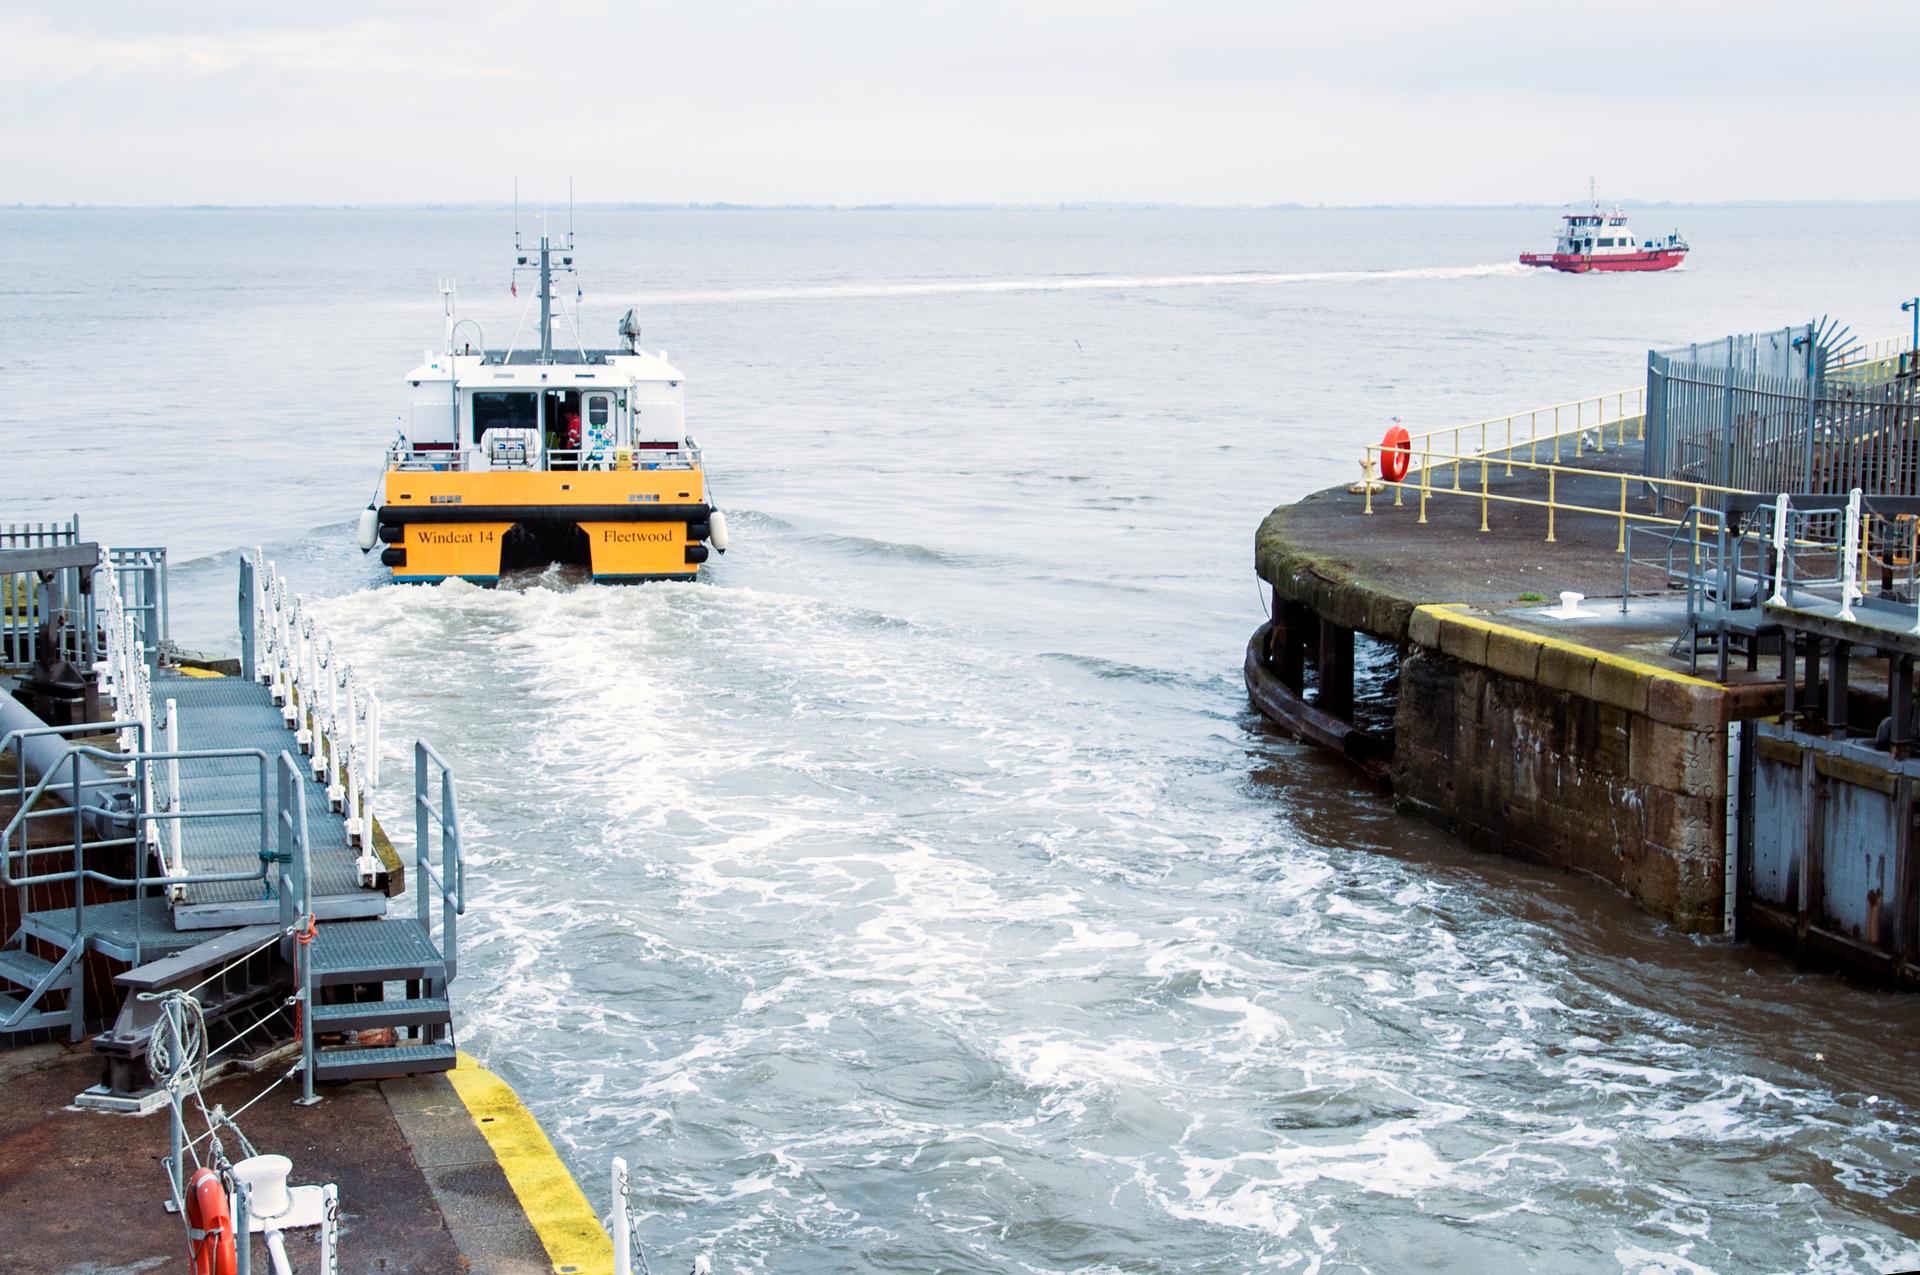 Crew Transfer Vessels (CTVs) ferry wind energy technicians out to offshore wind farms from the Port of Grimsby.